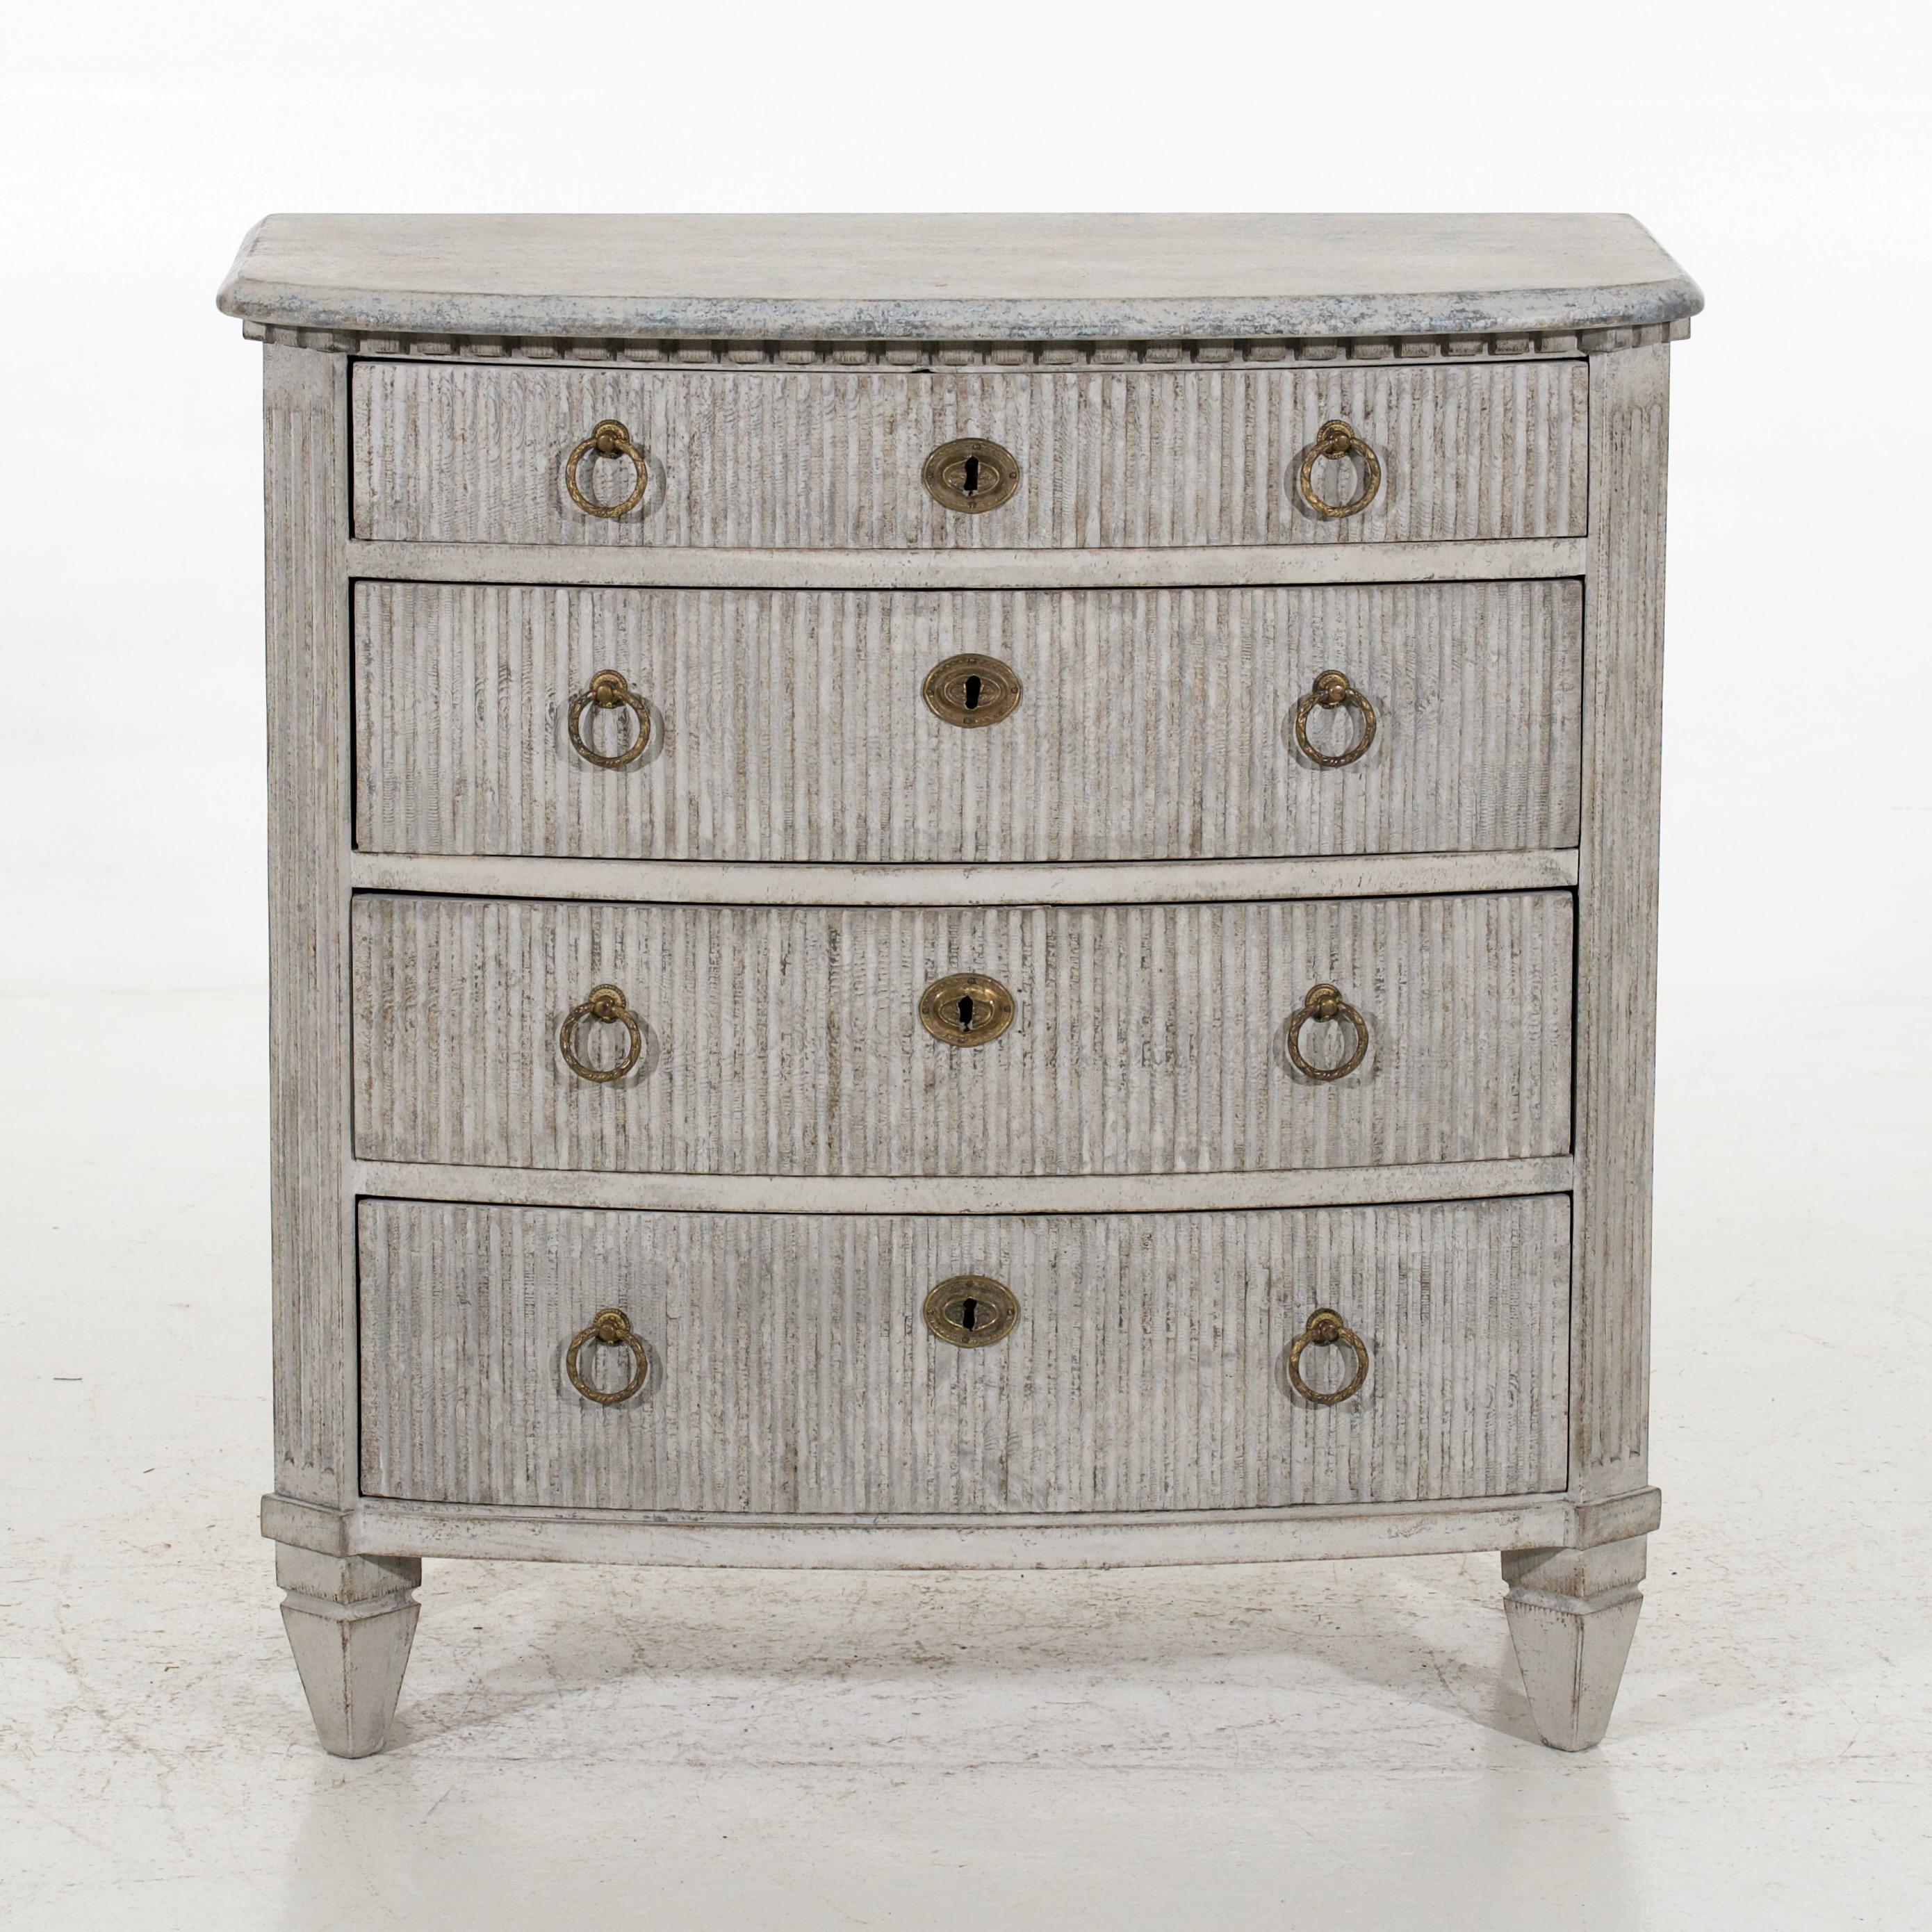 This beautiful antique chest originating from Sweden during the 19th century.